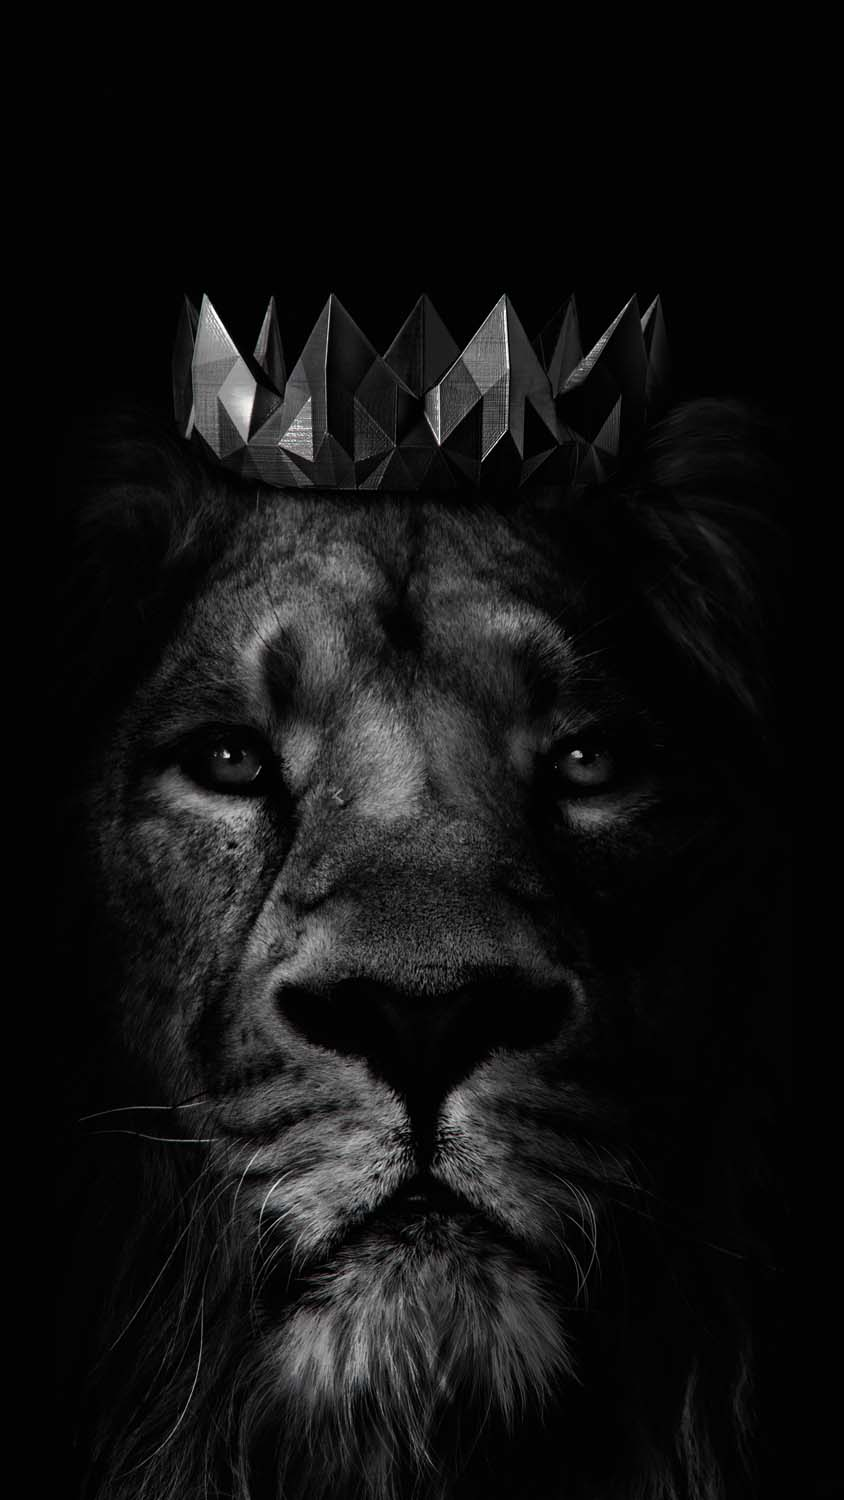 King Wallpaper APK for Android Download